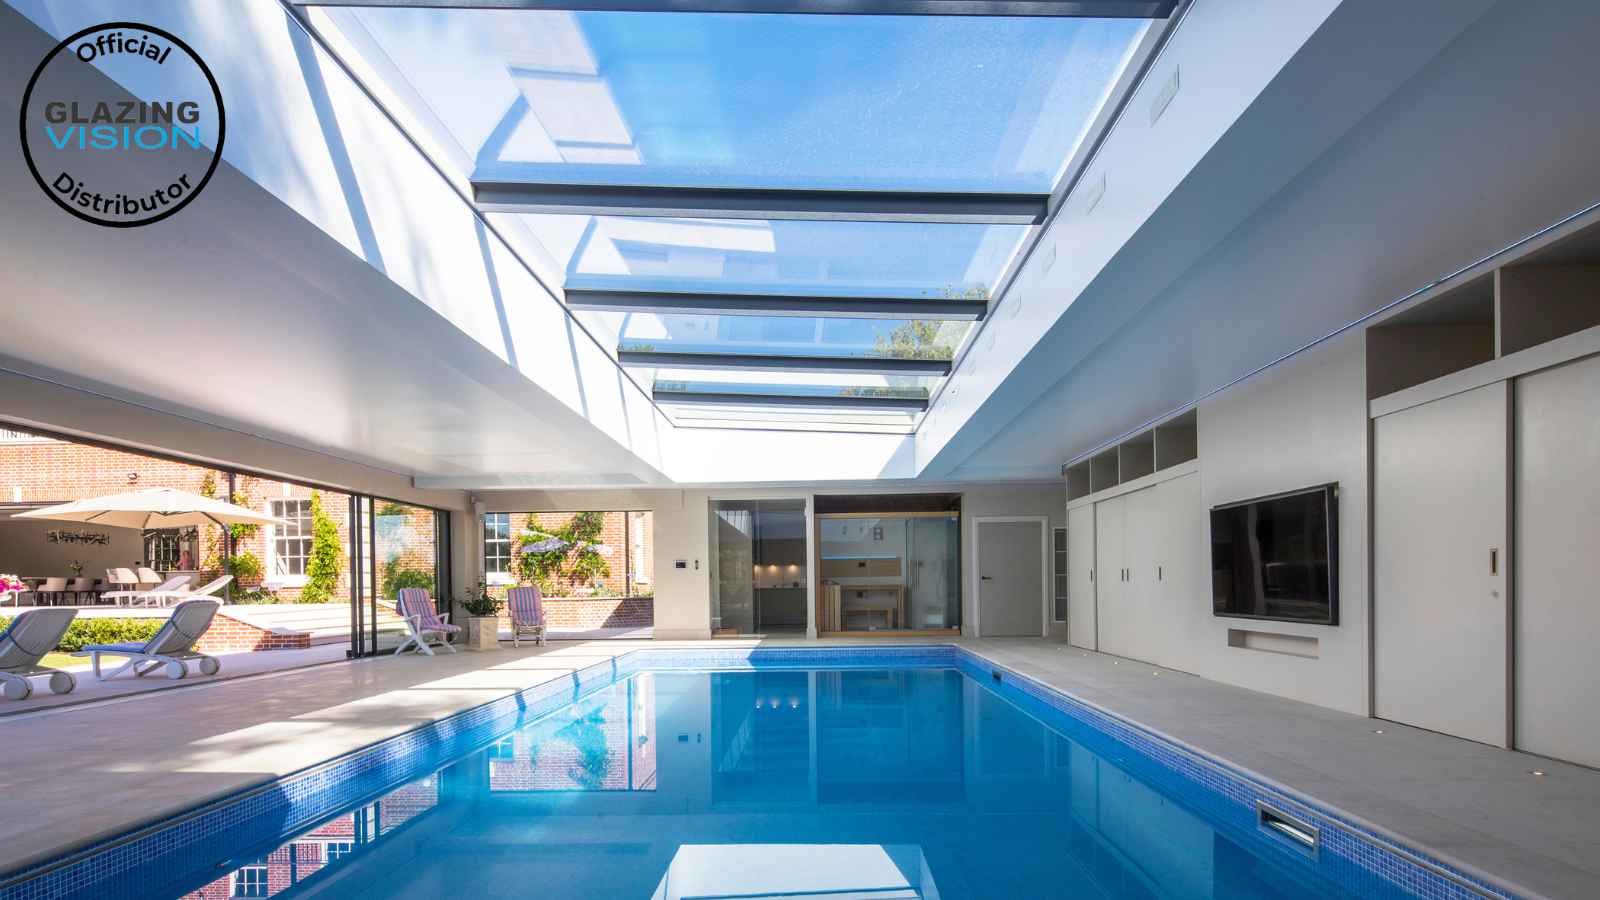 Cube Glass pens agreement as official Scottish distributor of Glazing Vision rooflights